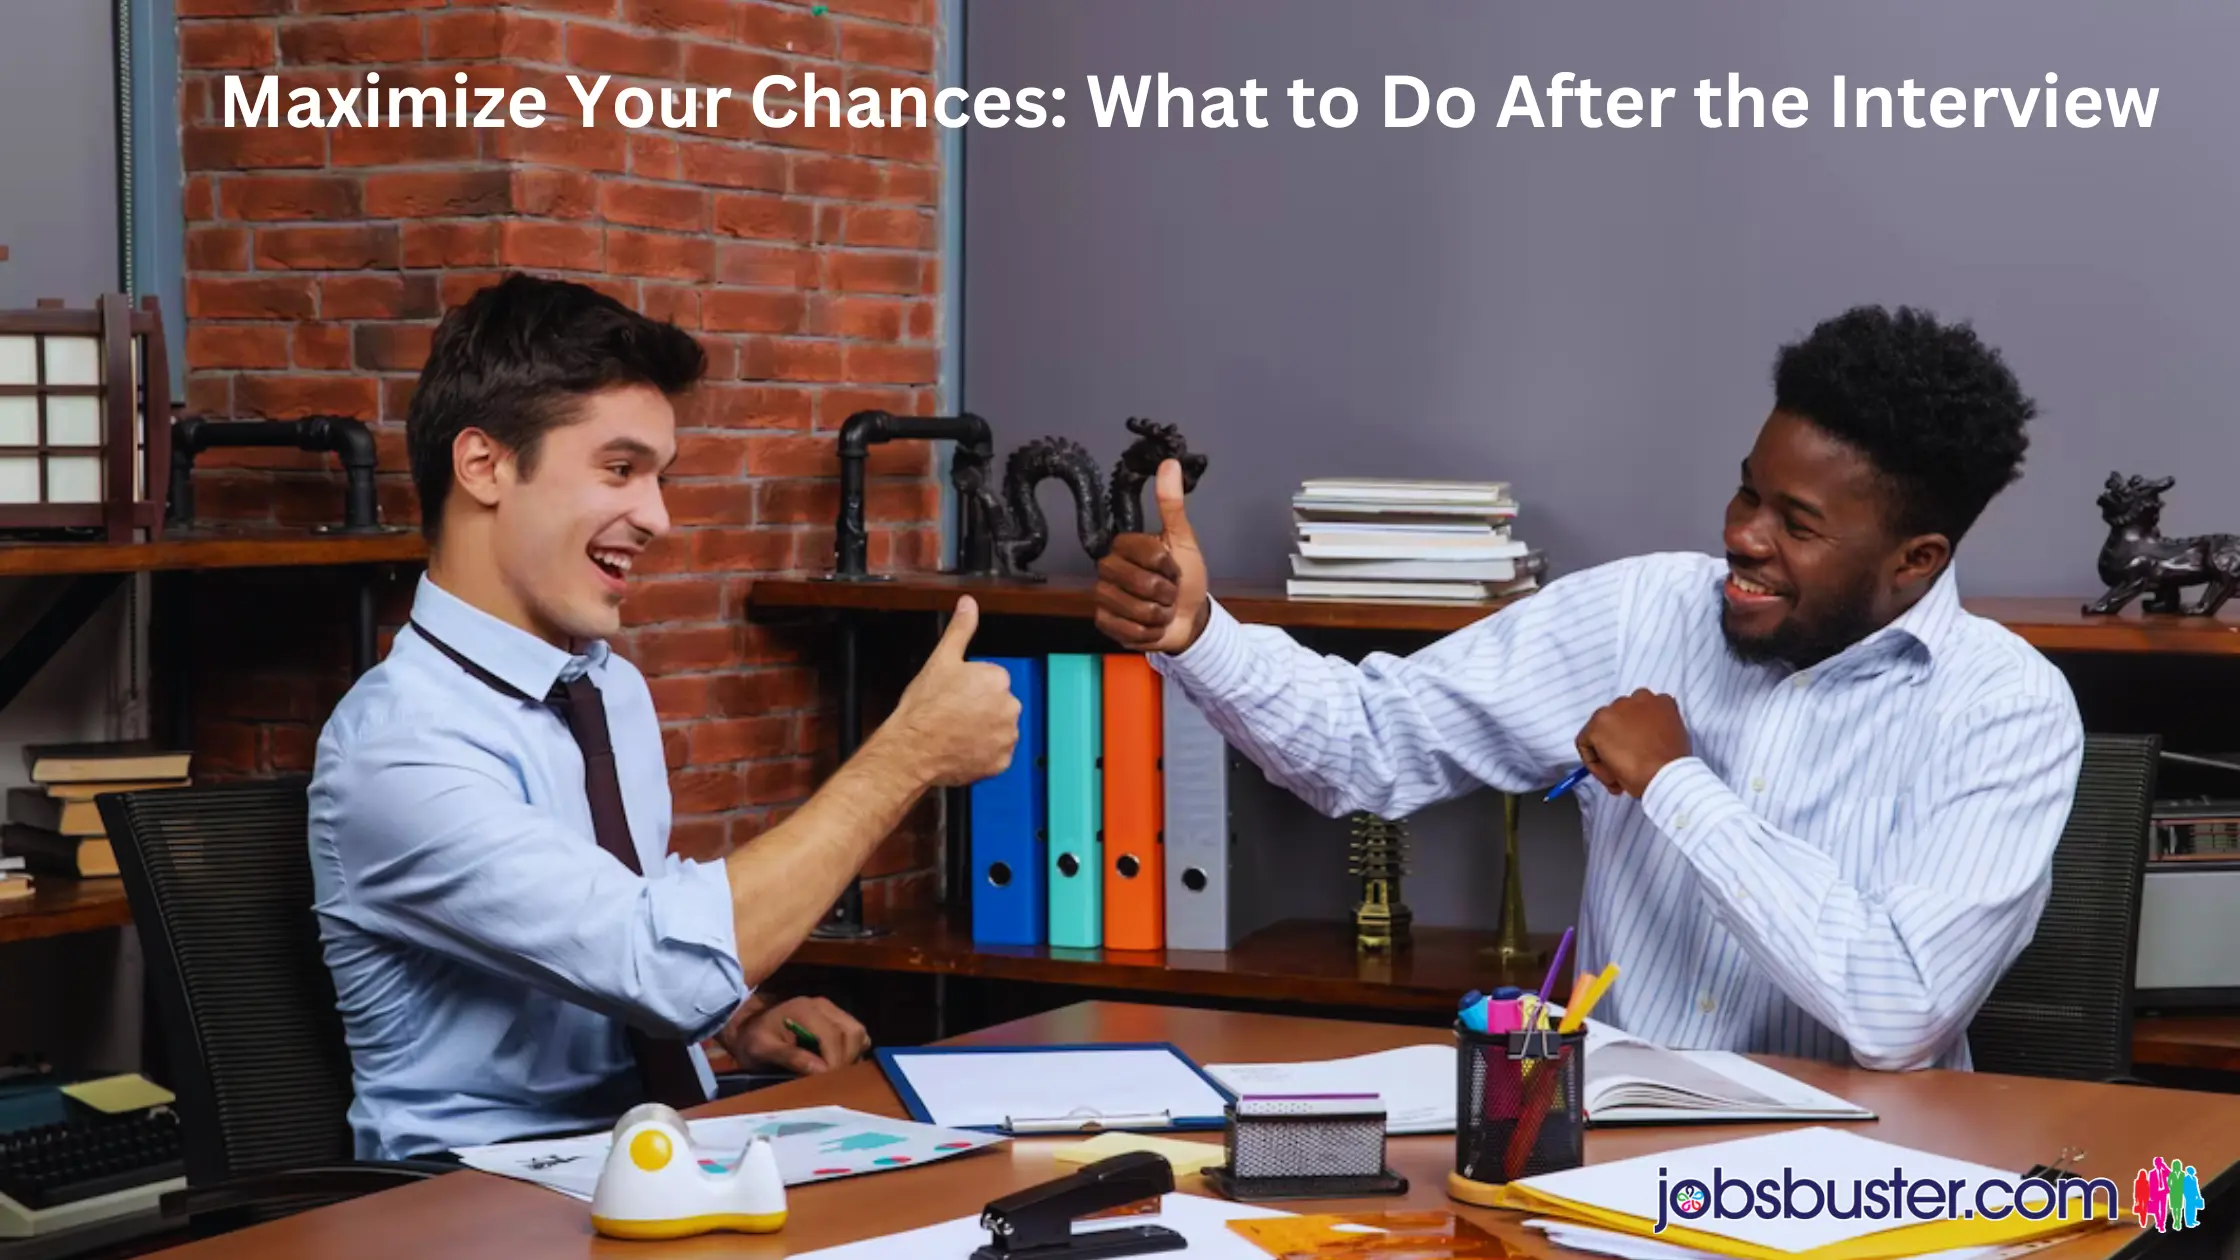 Maximize Your Chances: What to Do After the Interview